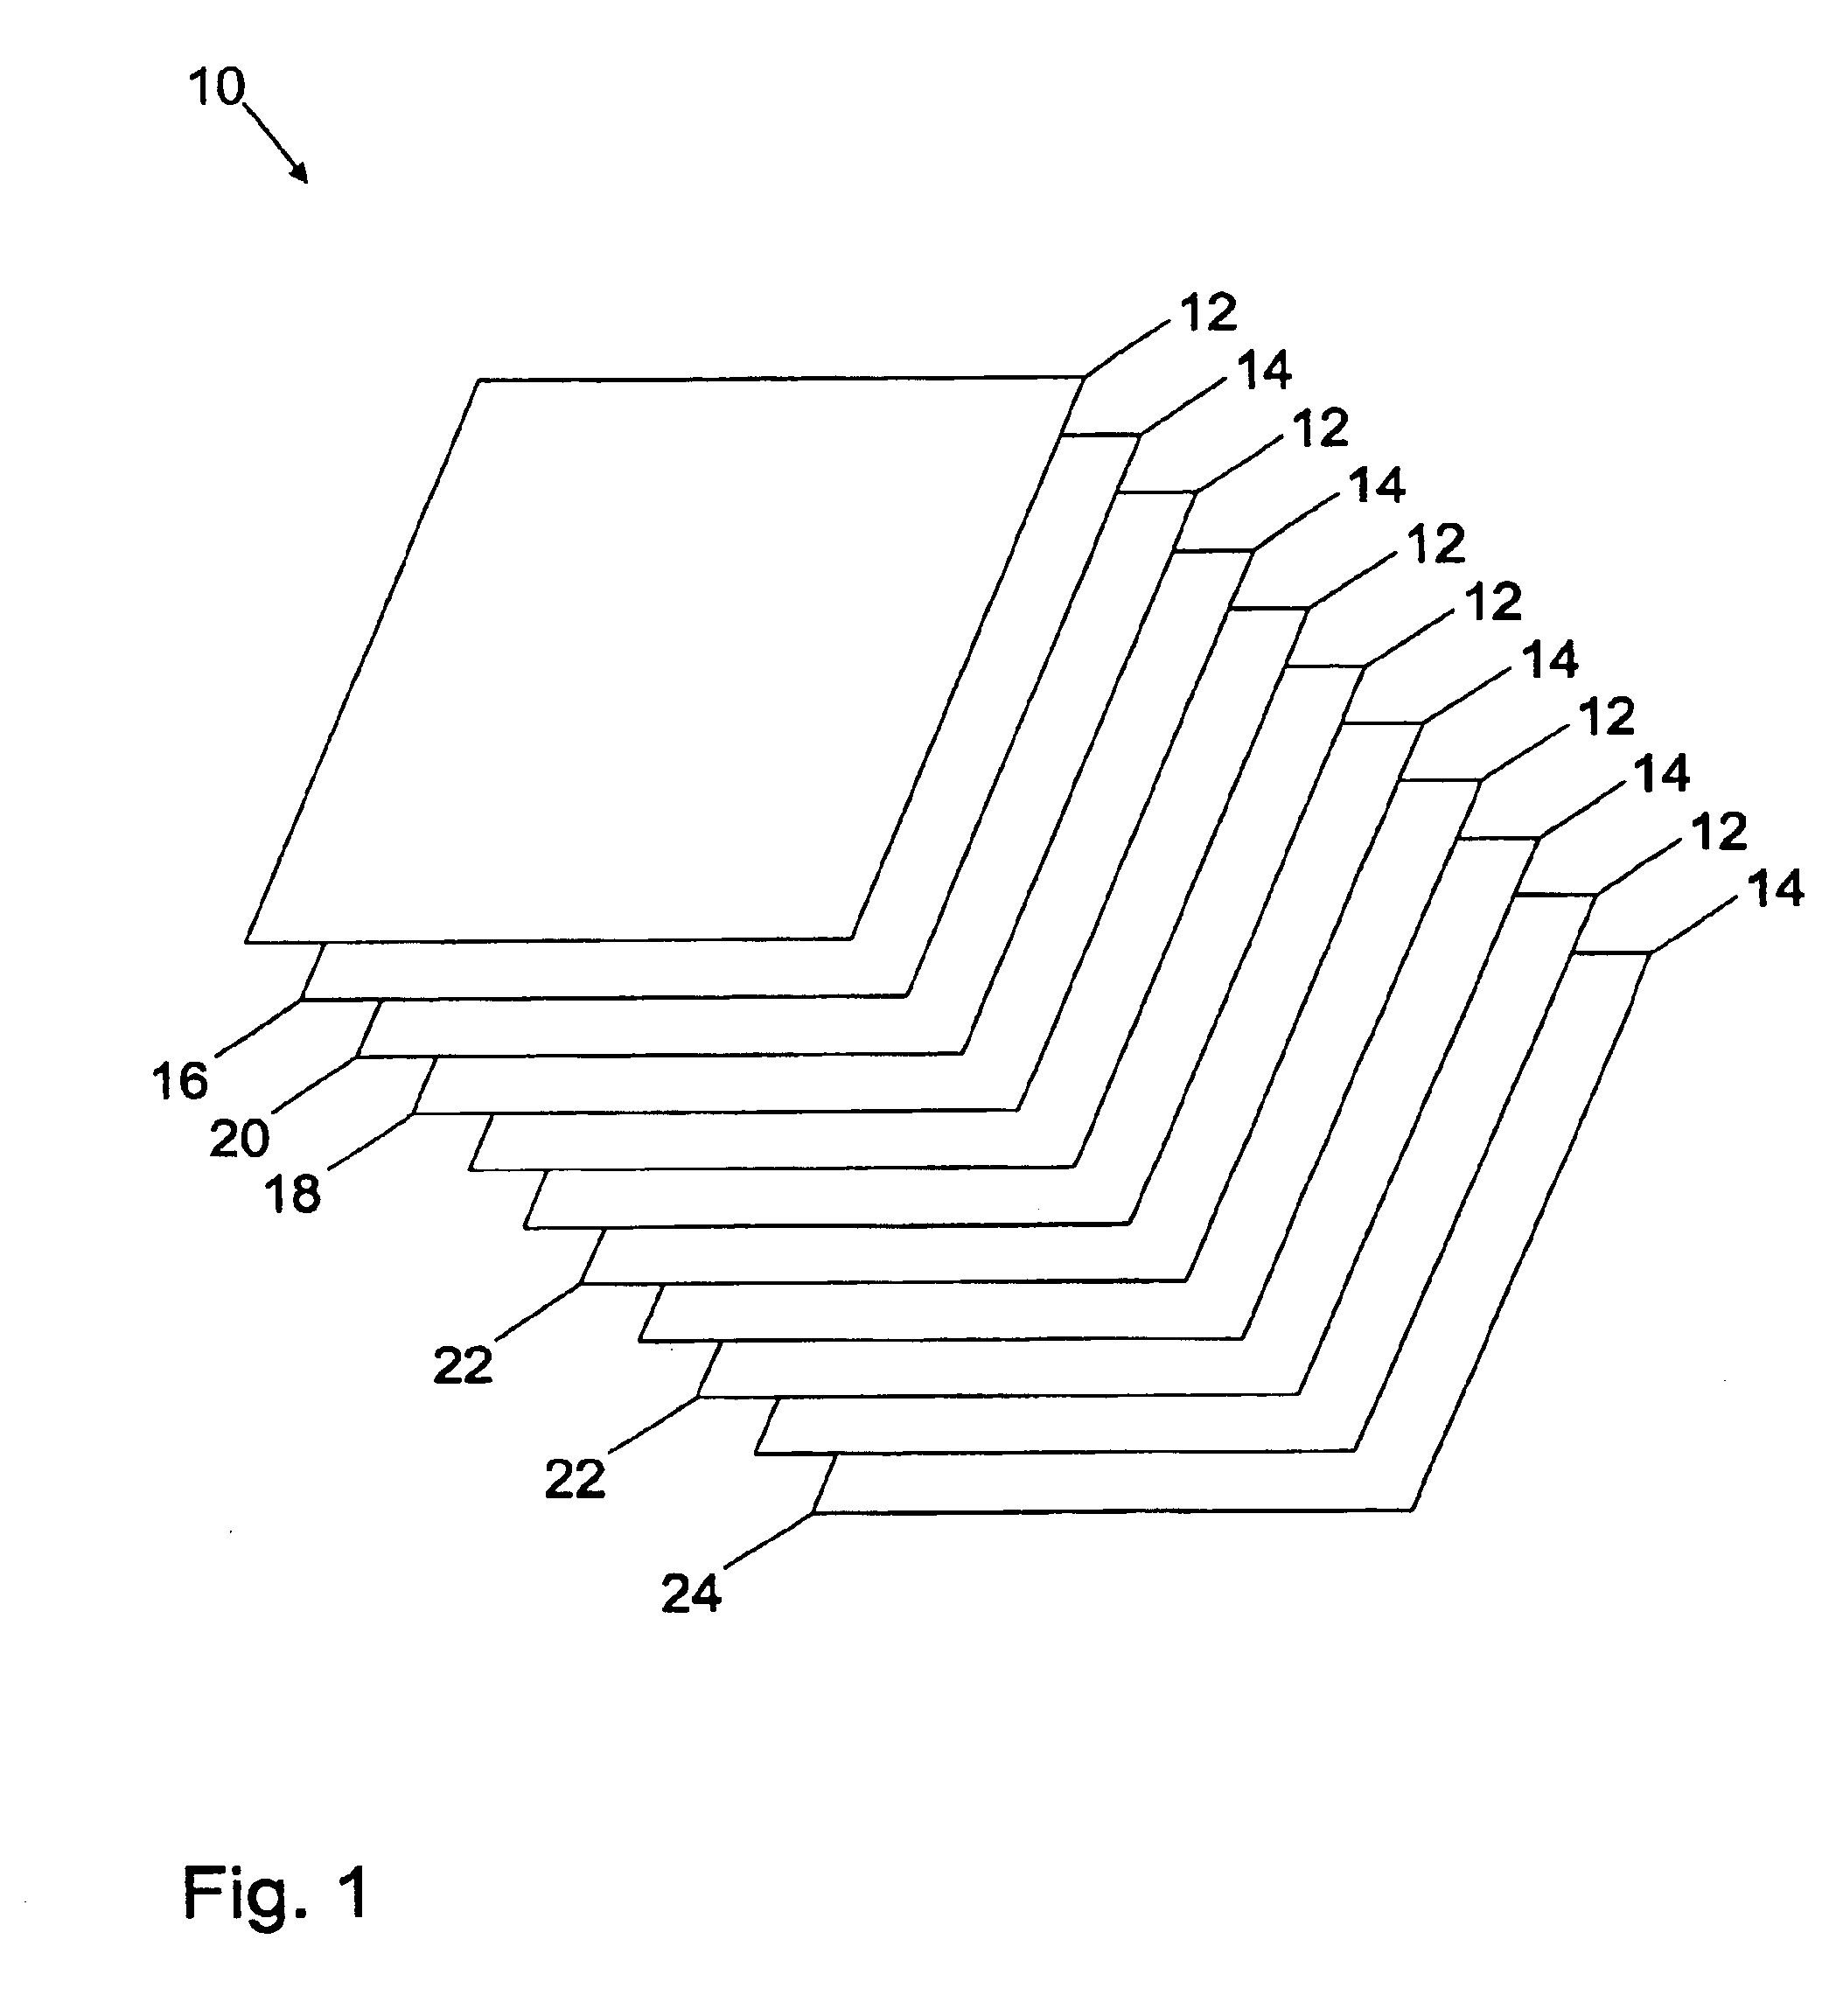 Printed circuit board noise attenuation using lossy conductors